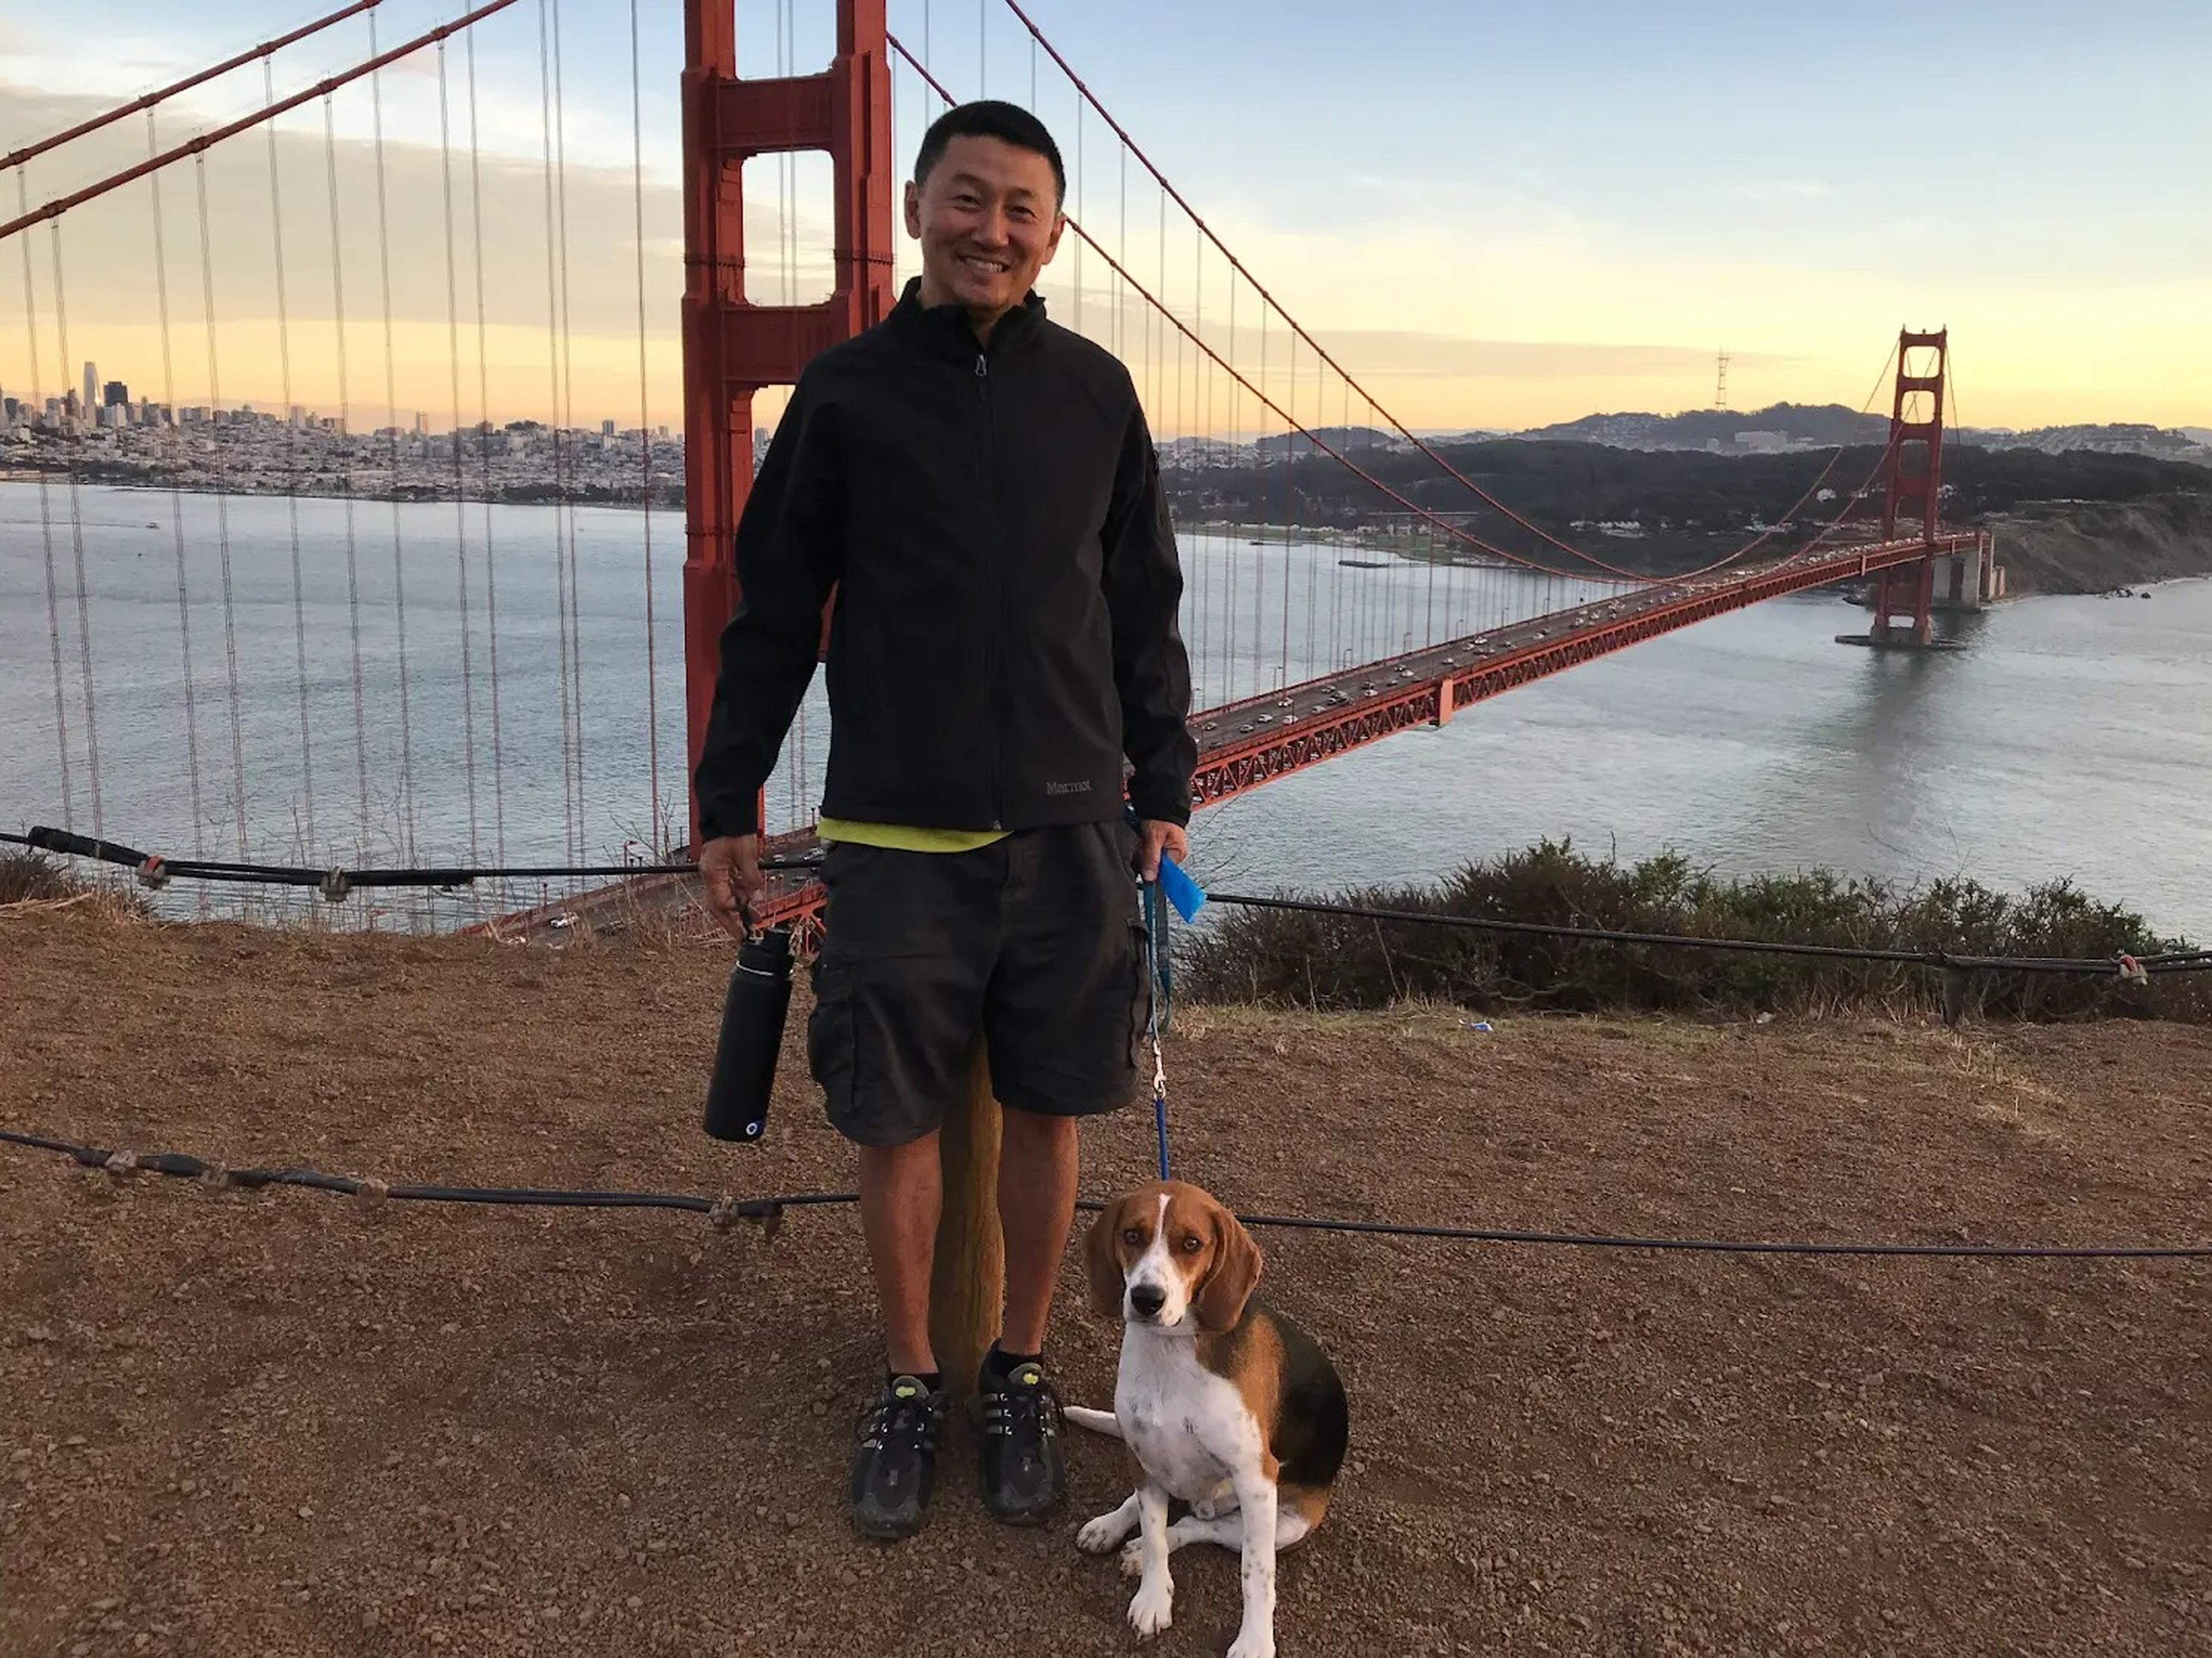 Richard Sim and his dog Auggie posing in front of the iconic Golden Gate bridge.